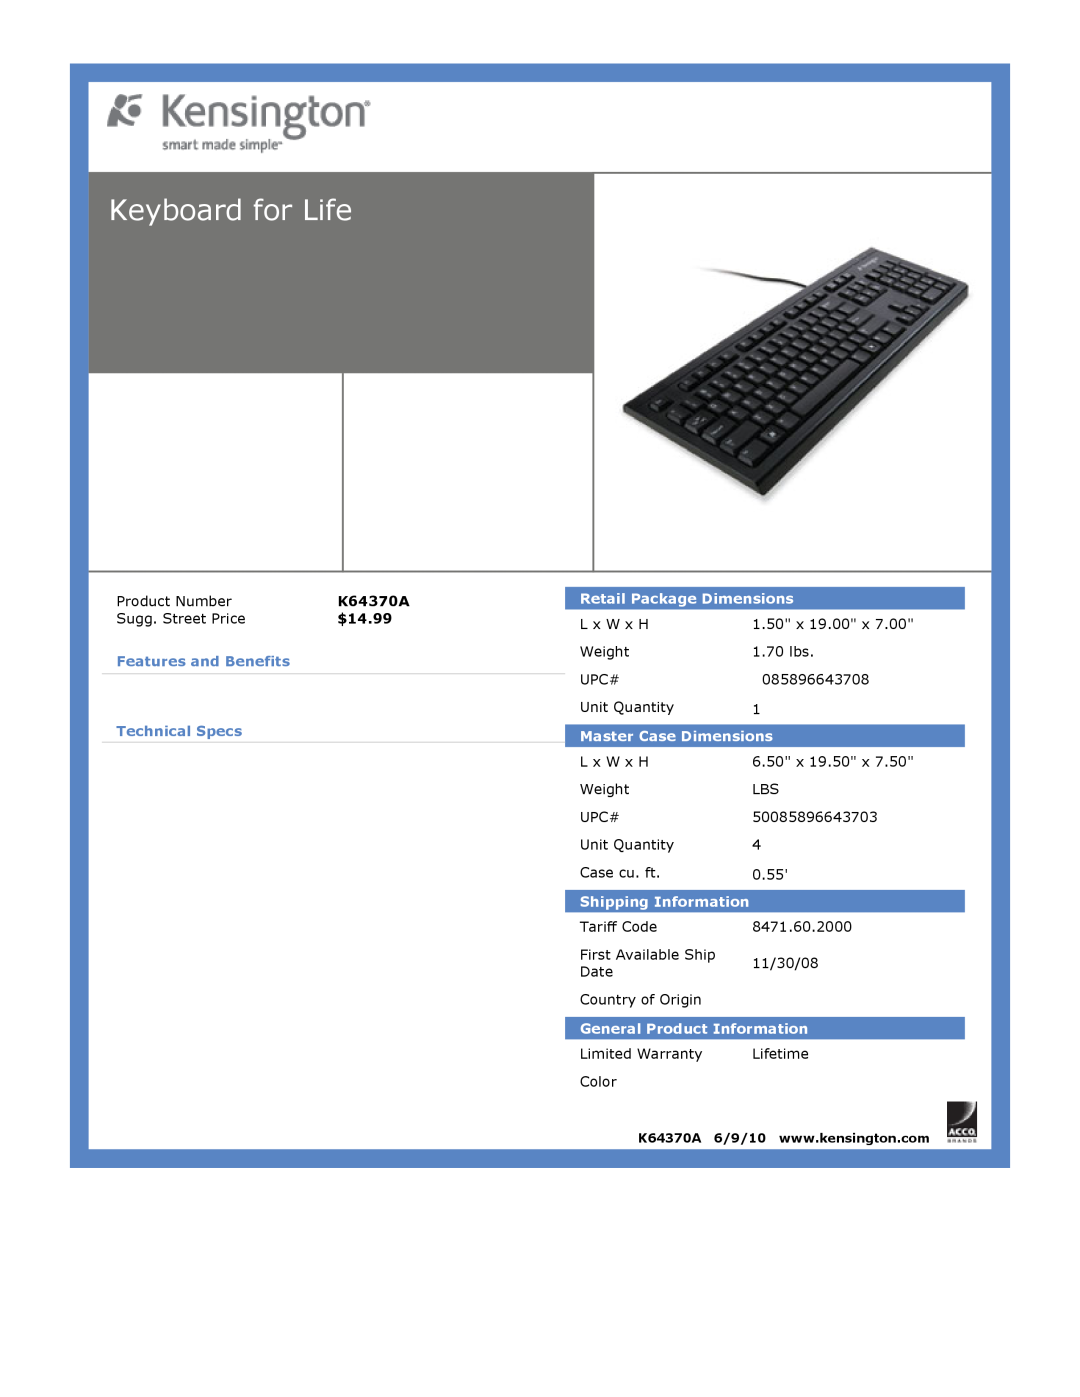 Kensington EU64325 dimensions Keyboard for Life, $14.99, Features and Benefits Technical Specs, Retail Package Dimensions 